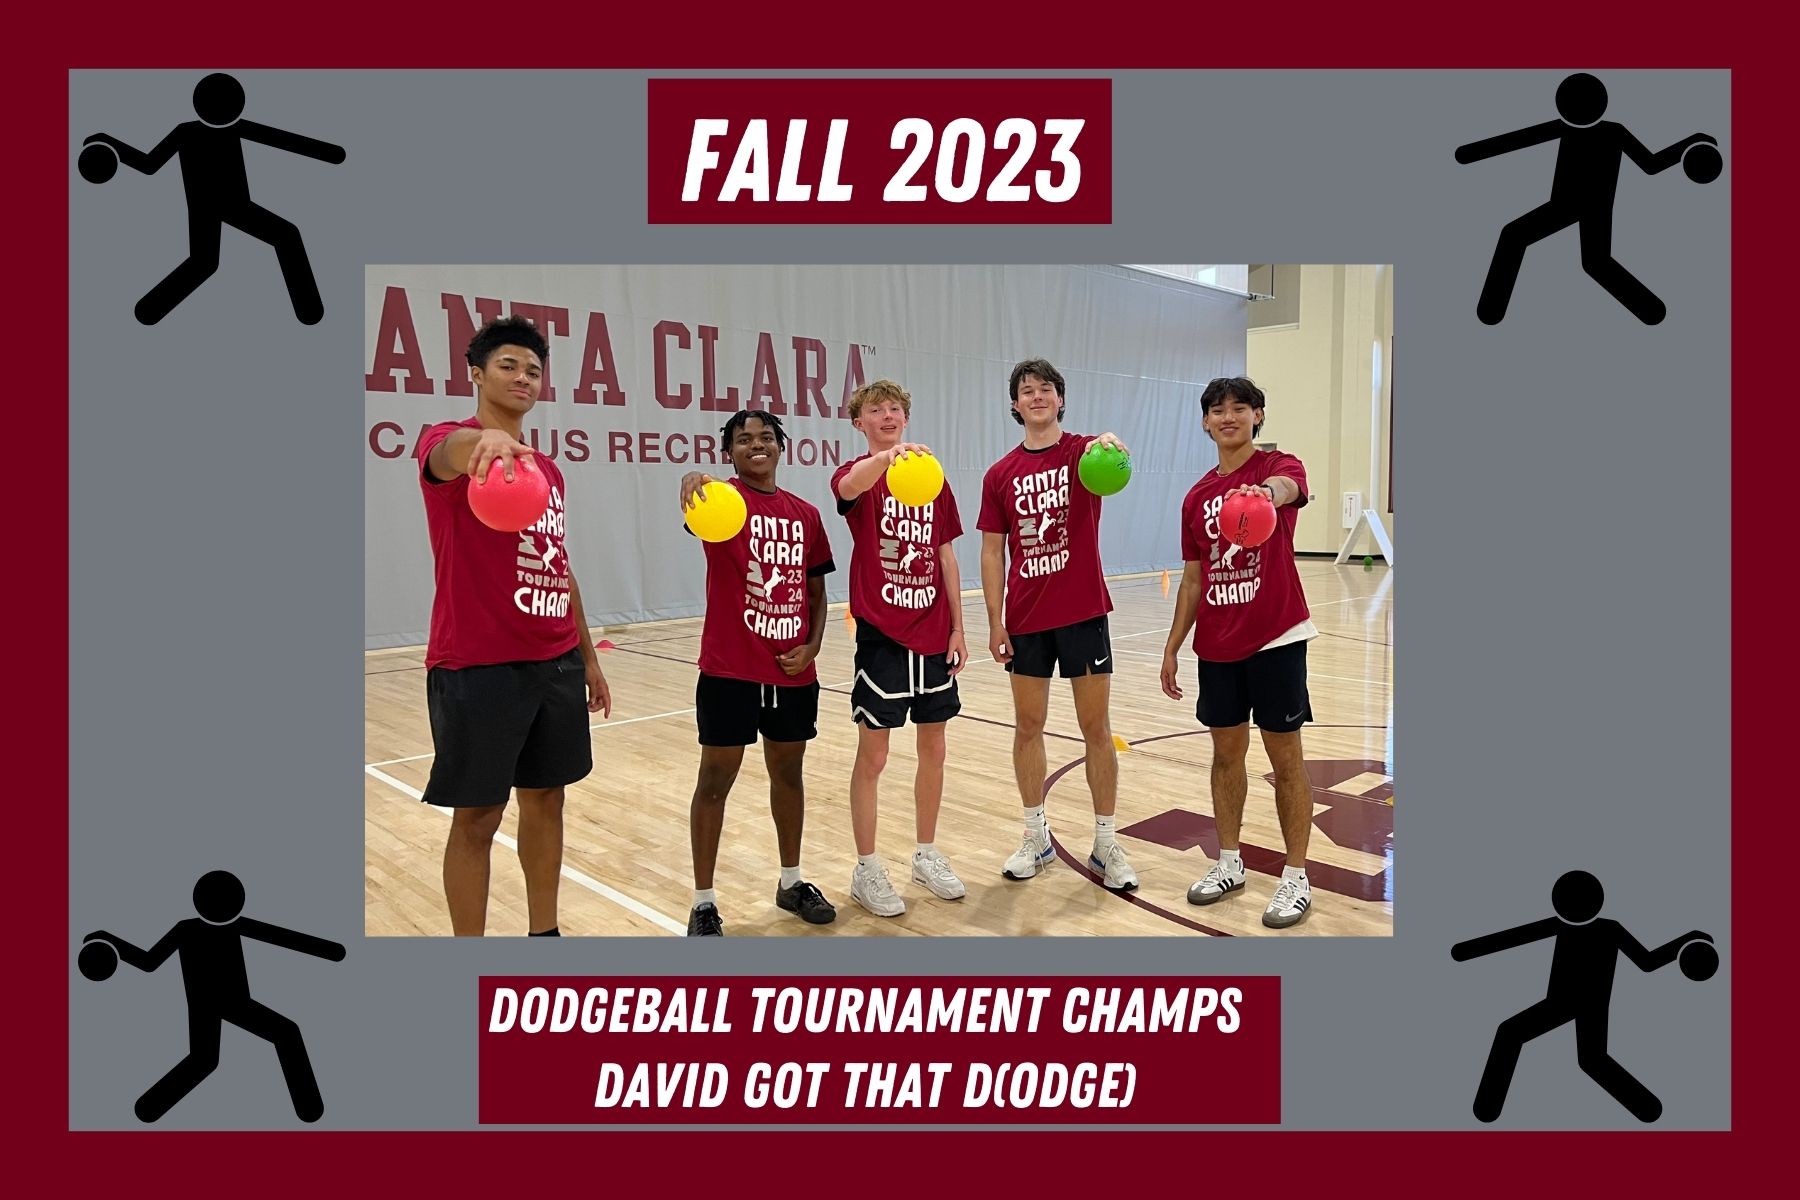 Photo of IM Dodgeball champs, David got that Dodge, posing with their IM Champ t shirts and holding dodgeballs towards the camera